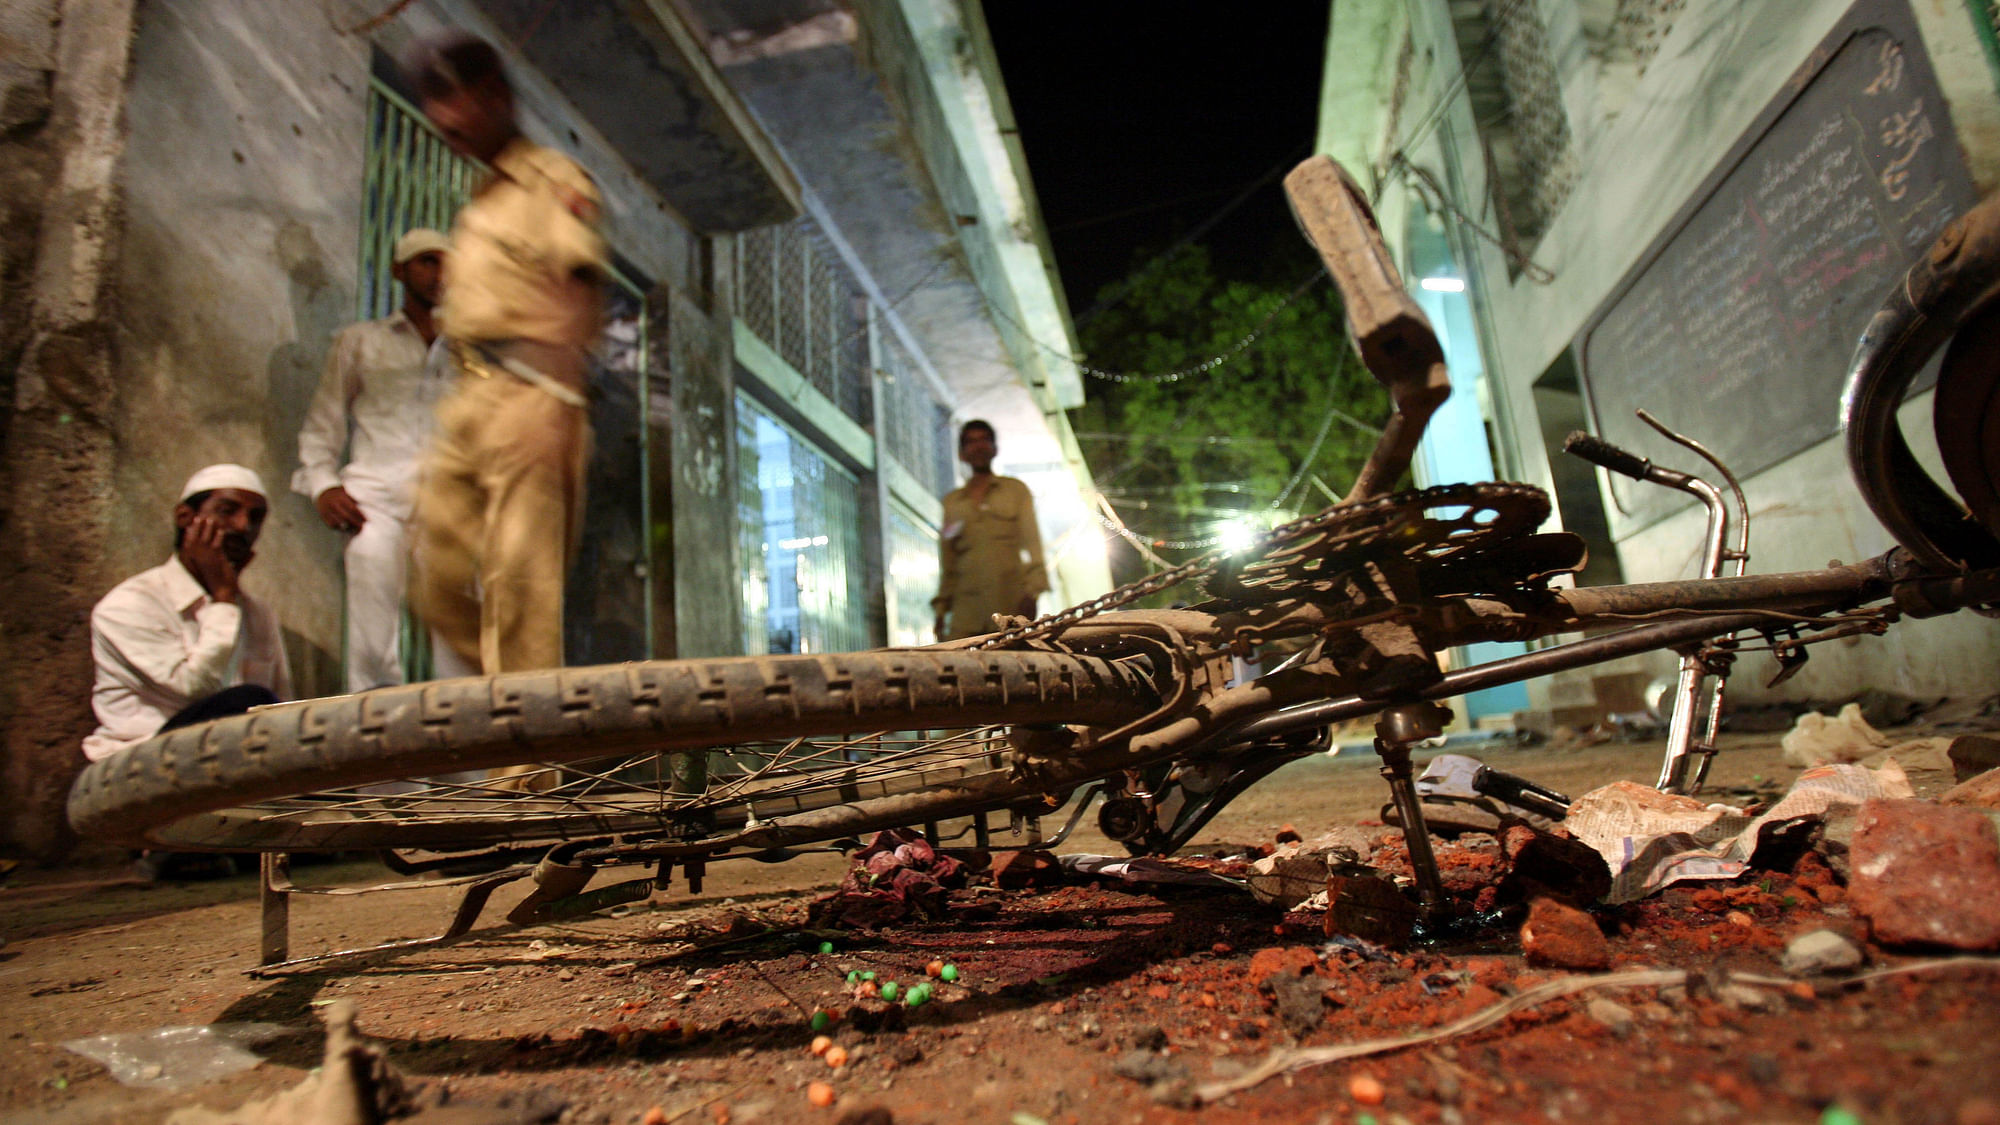 People walk past a damaged bicycle lying at a blast site inside a mosque in Malegaon, 260 km northeast of Mumbai 9 September.(Photo: Reuters)